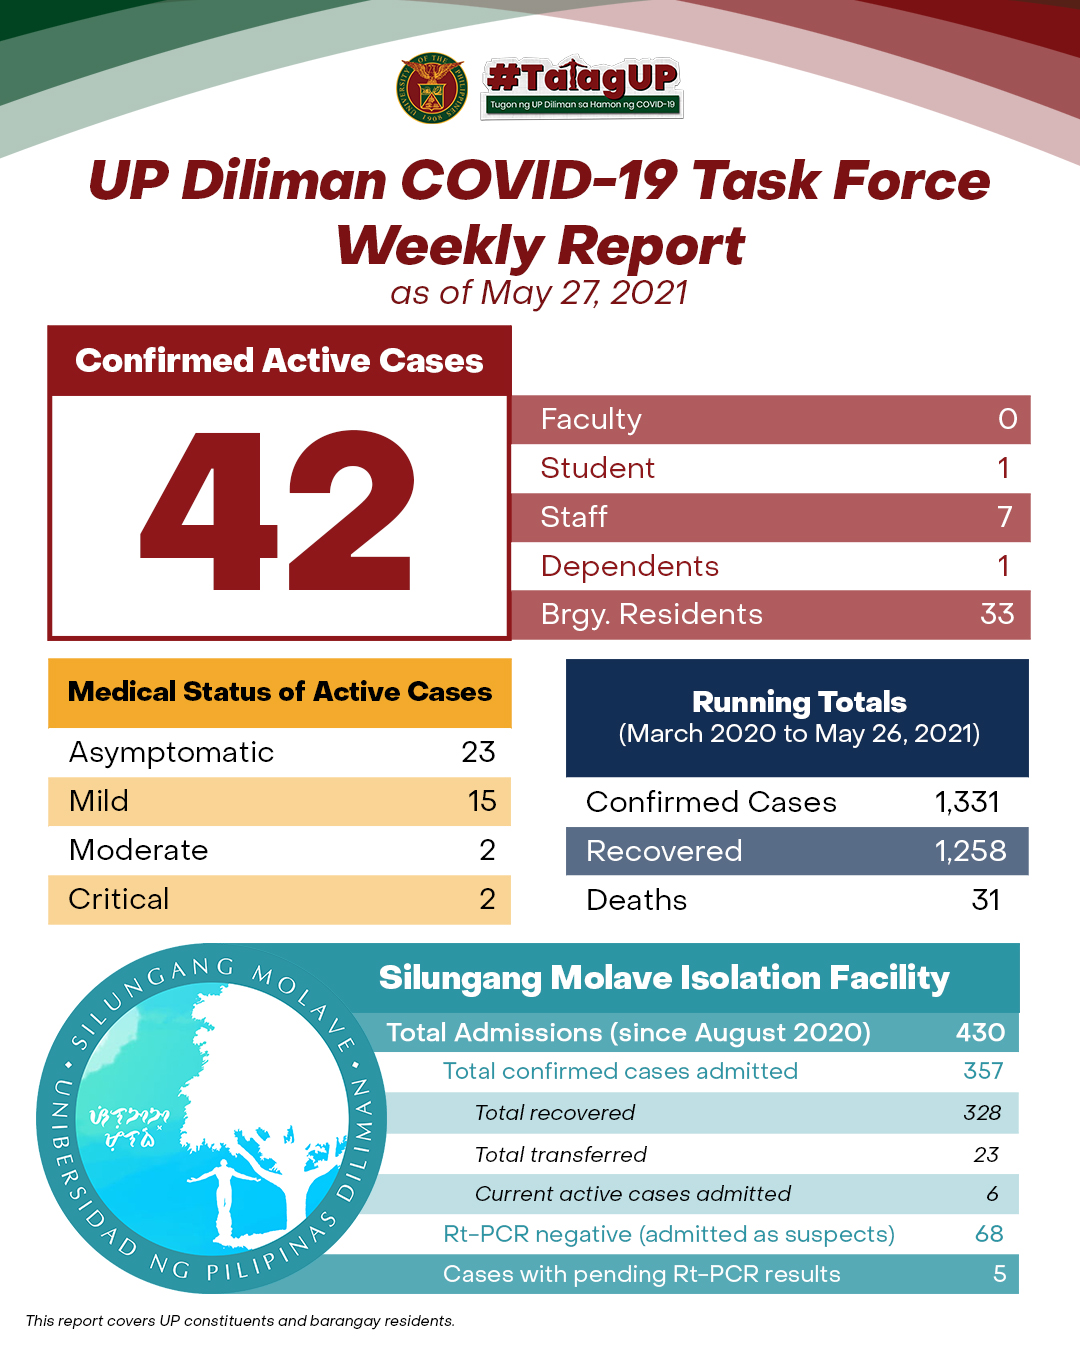 UP Diliman COVID-19 Task Force Weekly Report as of May 27, 2021